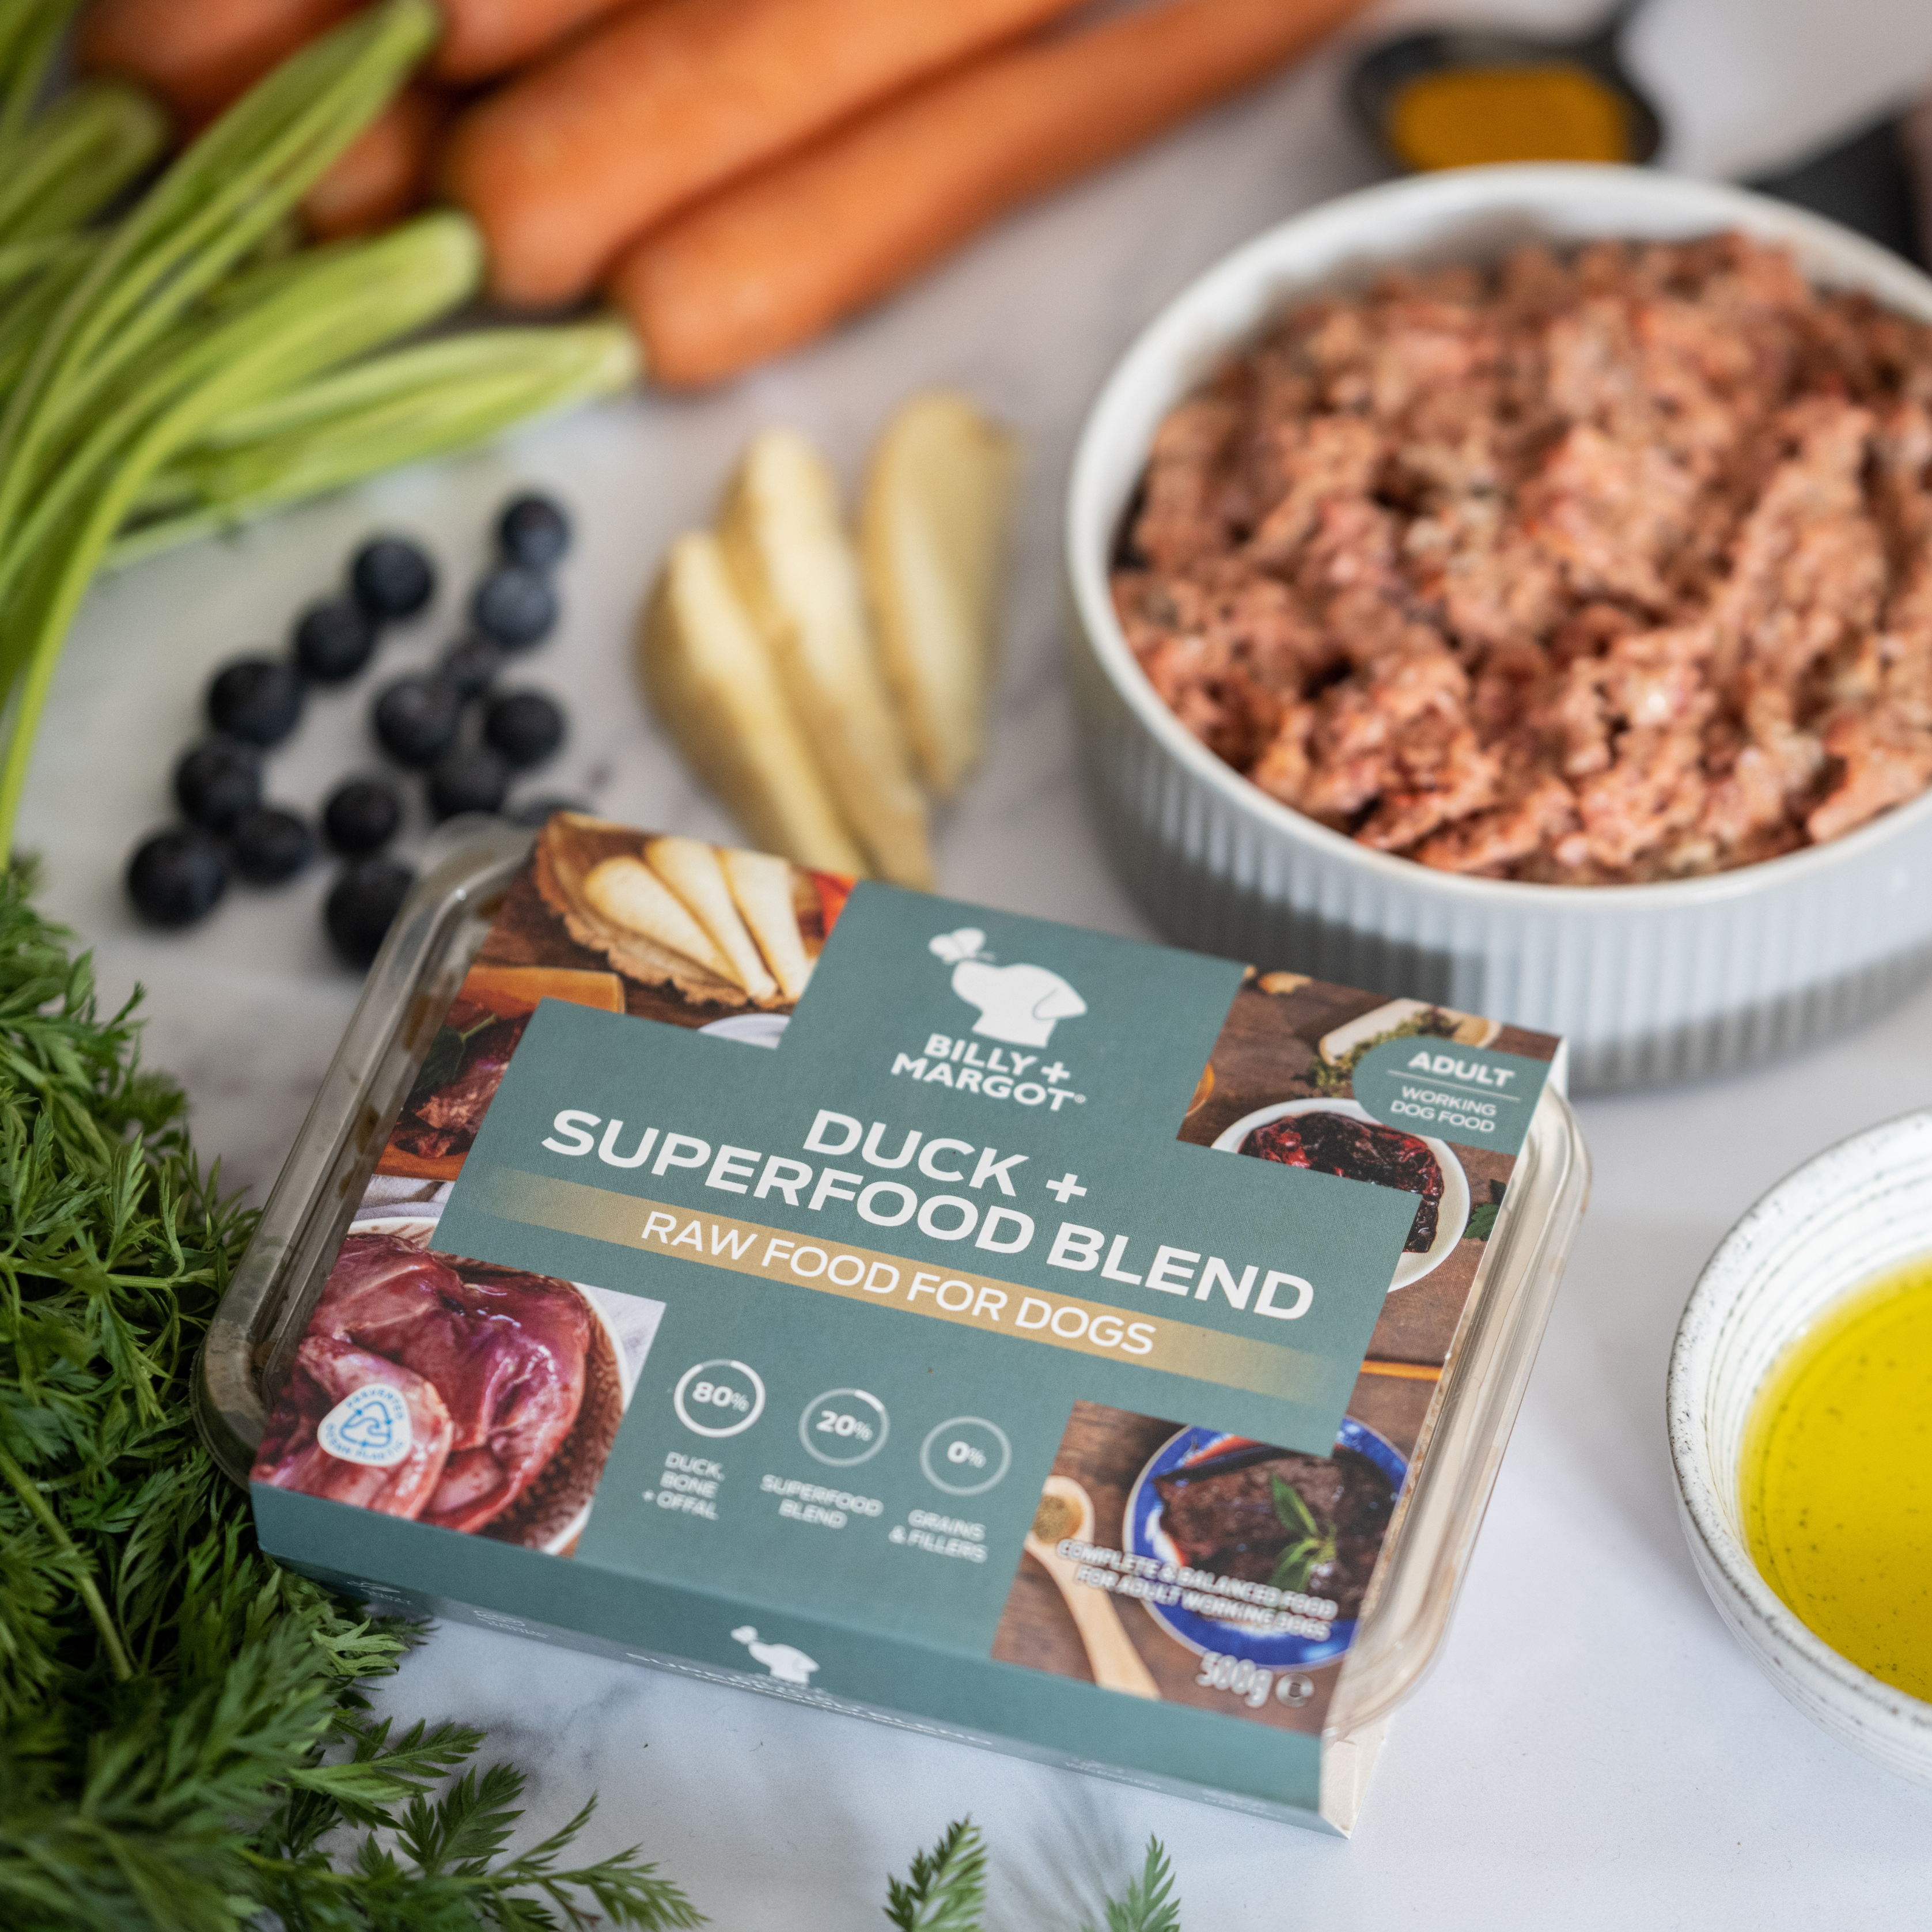 grain free raw dog food ingredients include premium duck meat, bone, offal, seasonal vegetables and a unique superfood blend.d